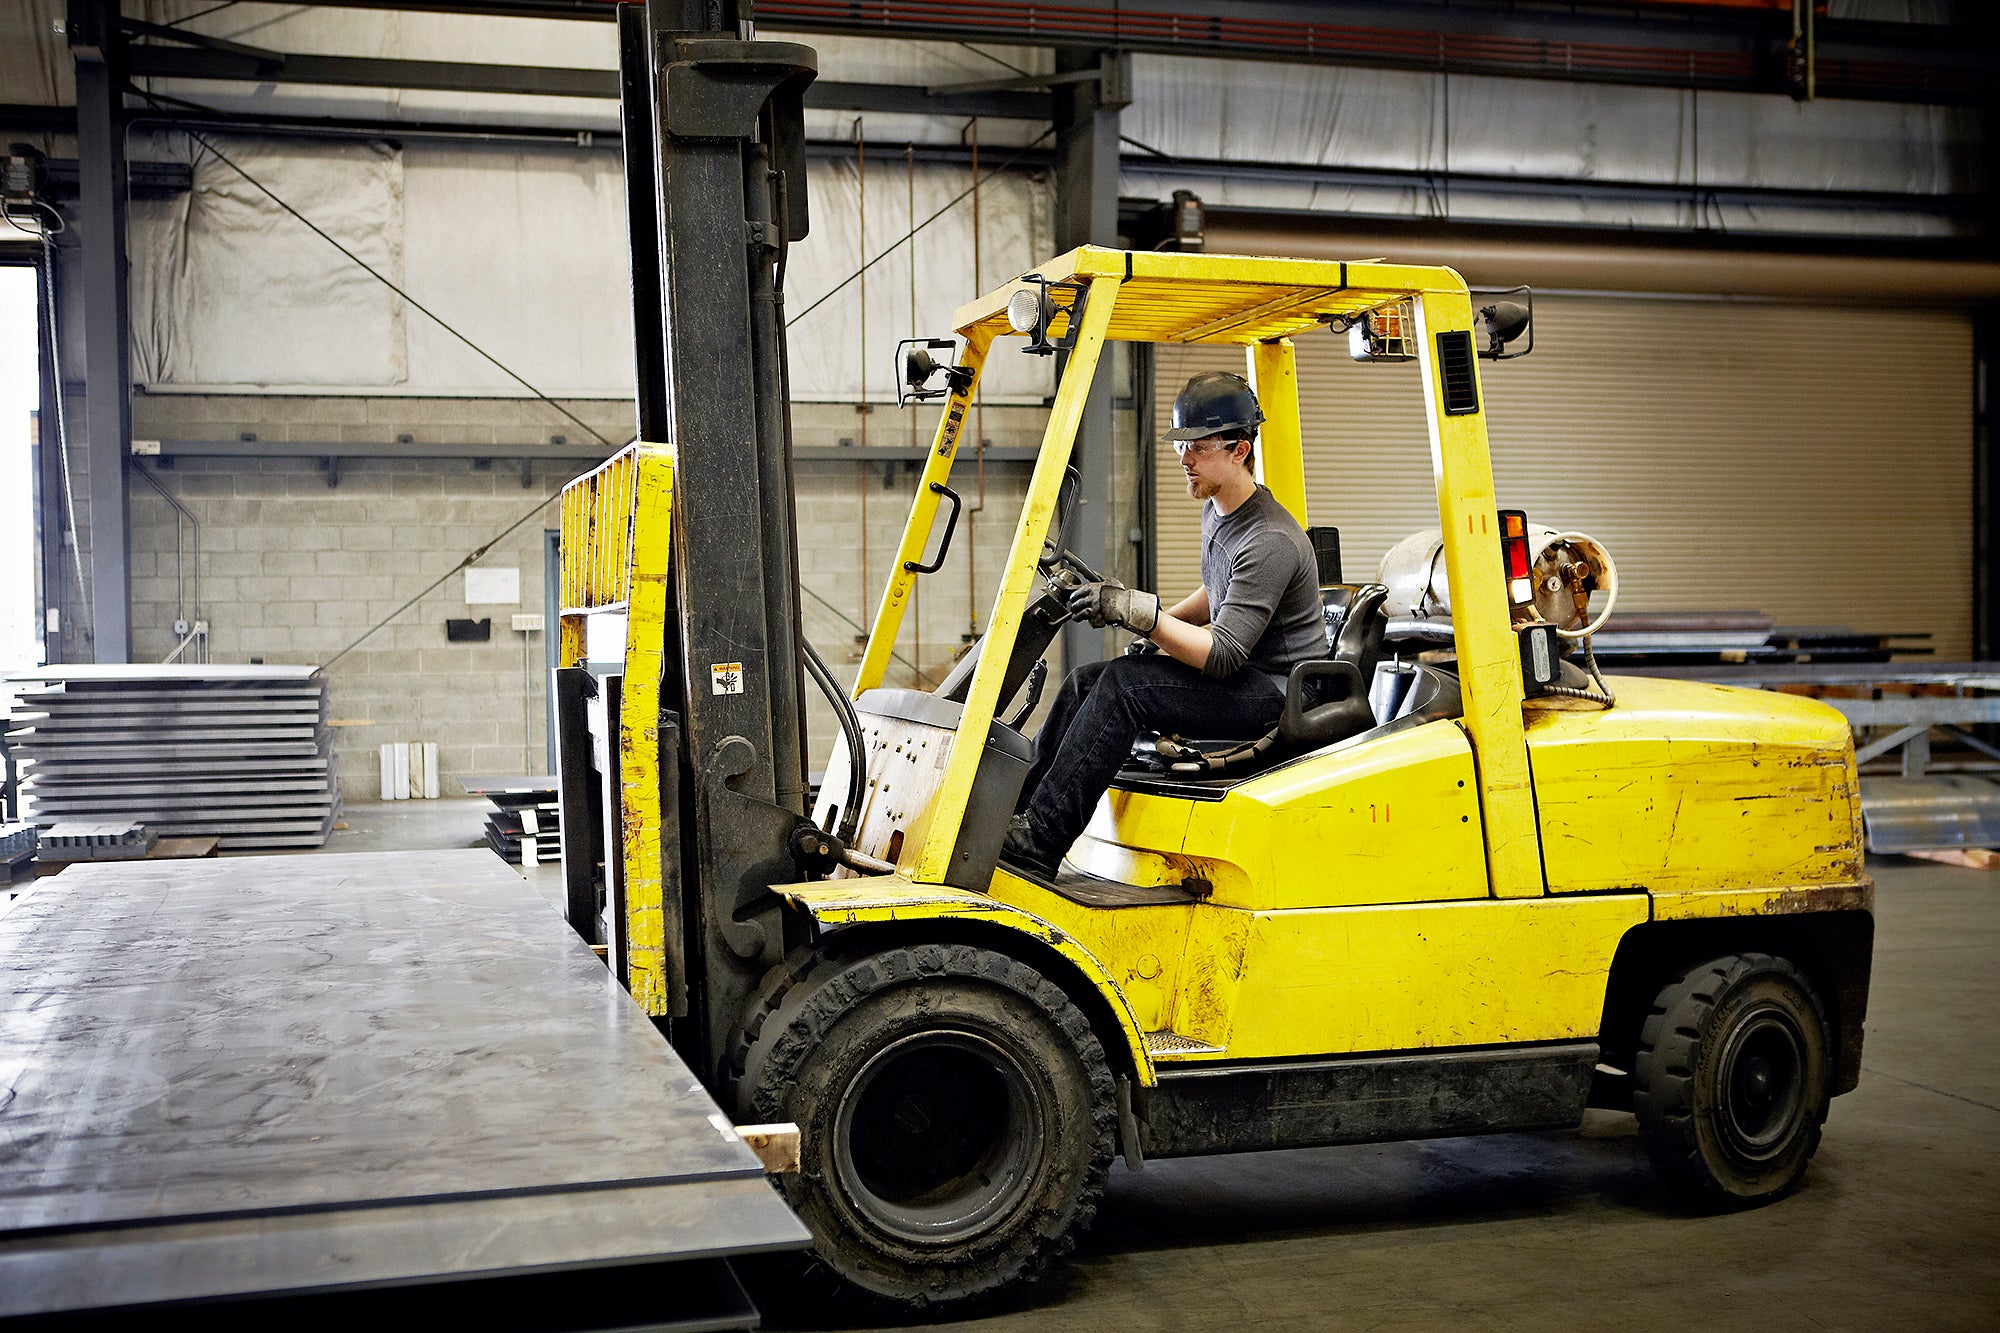 A man wearing a hard hat and safety glasses uses a large yellow forklift to lift large sheets of metal.